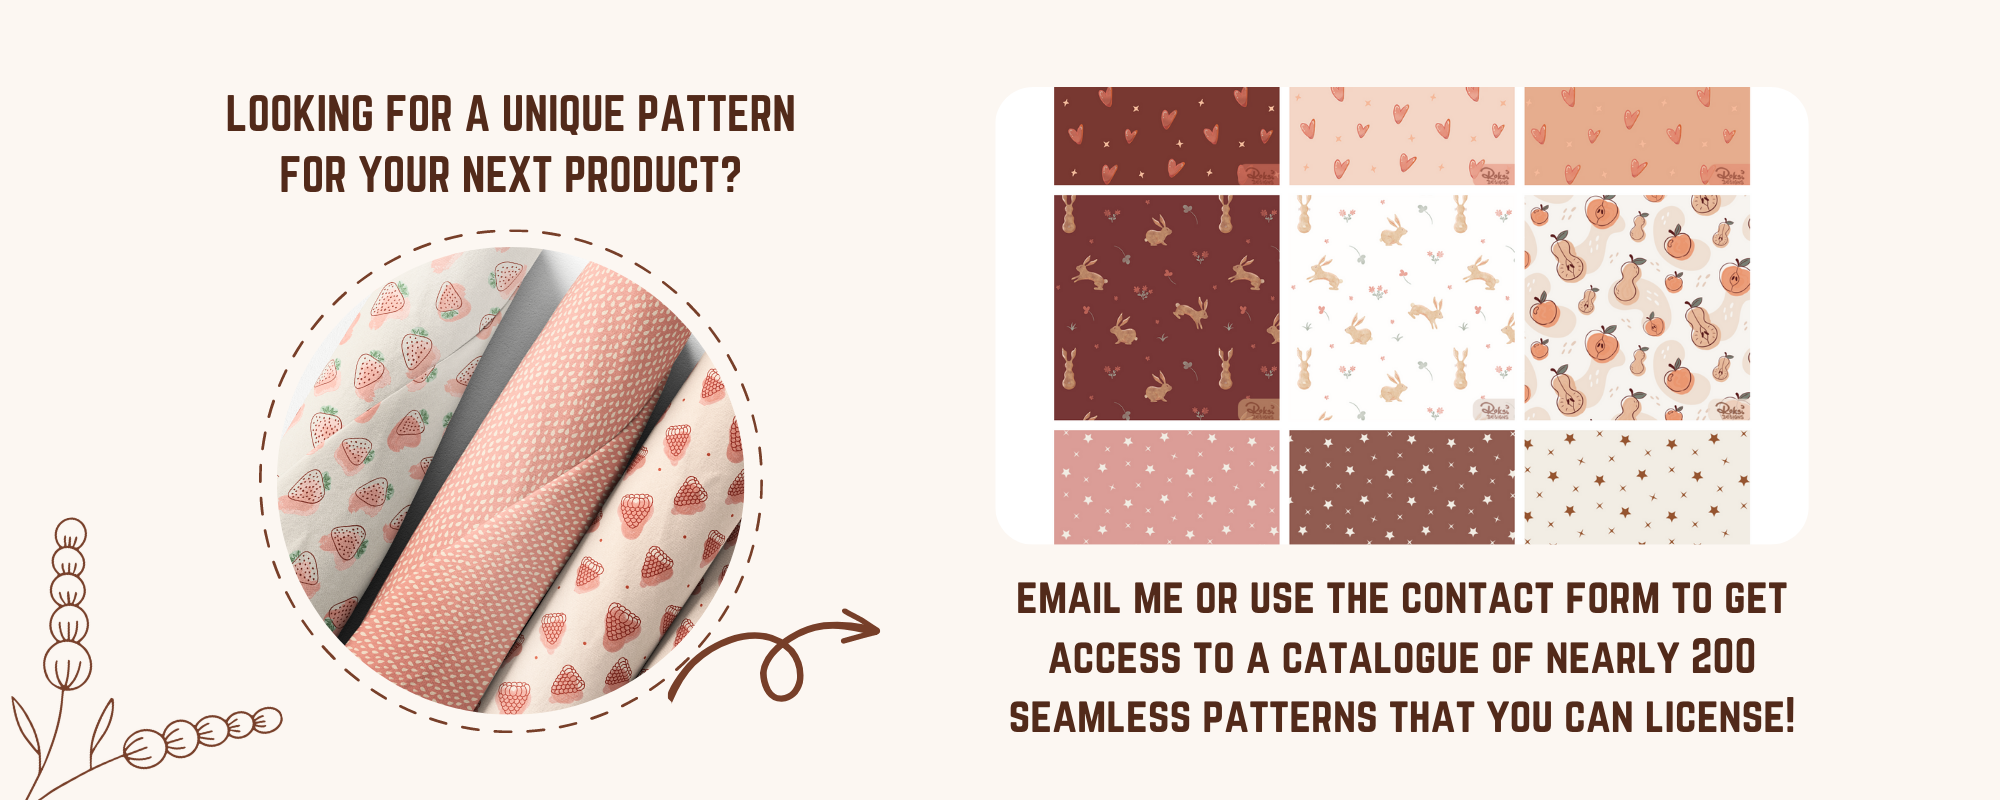 Looking for a unique pattern for your next product? Contact me to get access to nearly 200 seamless patterns that you can license!